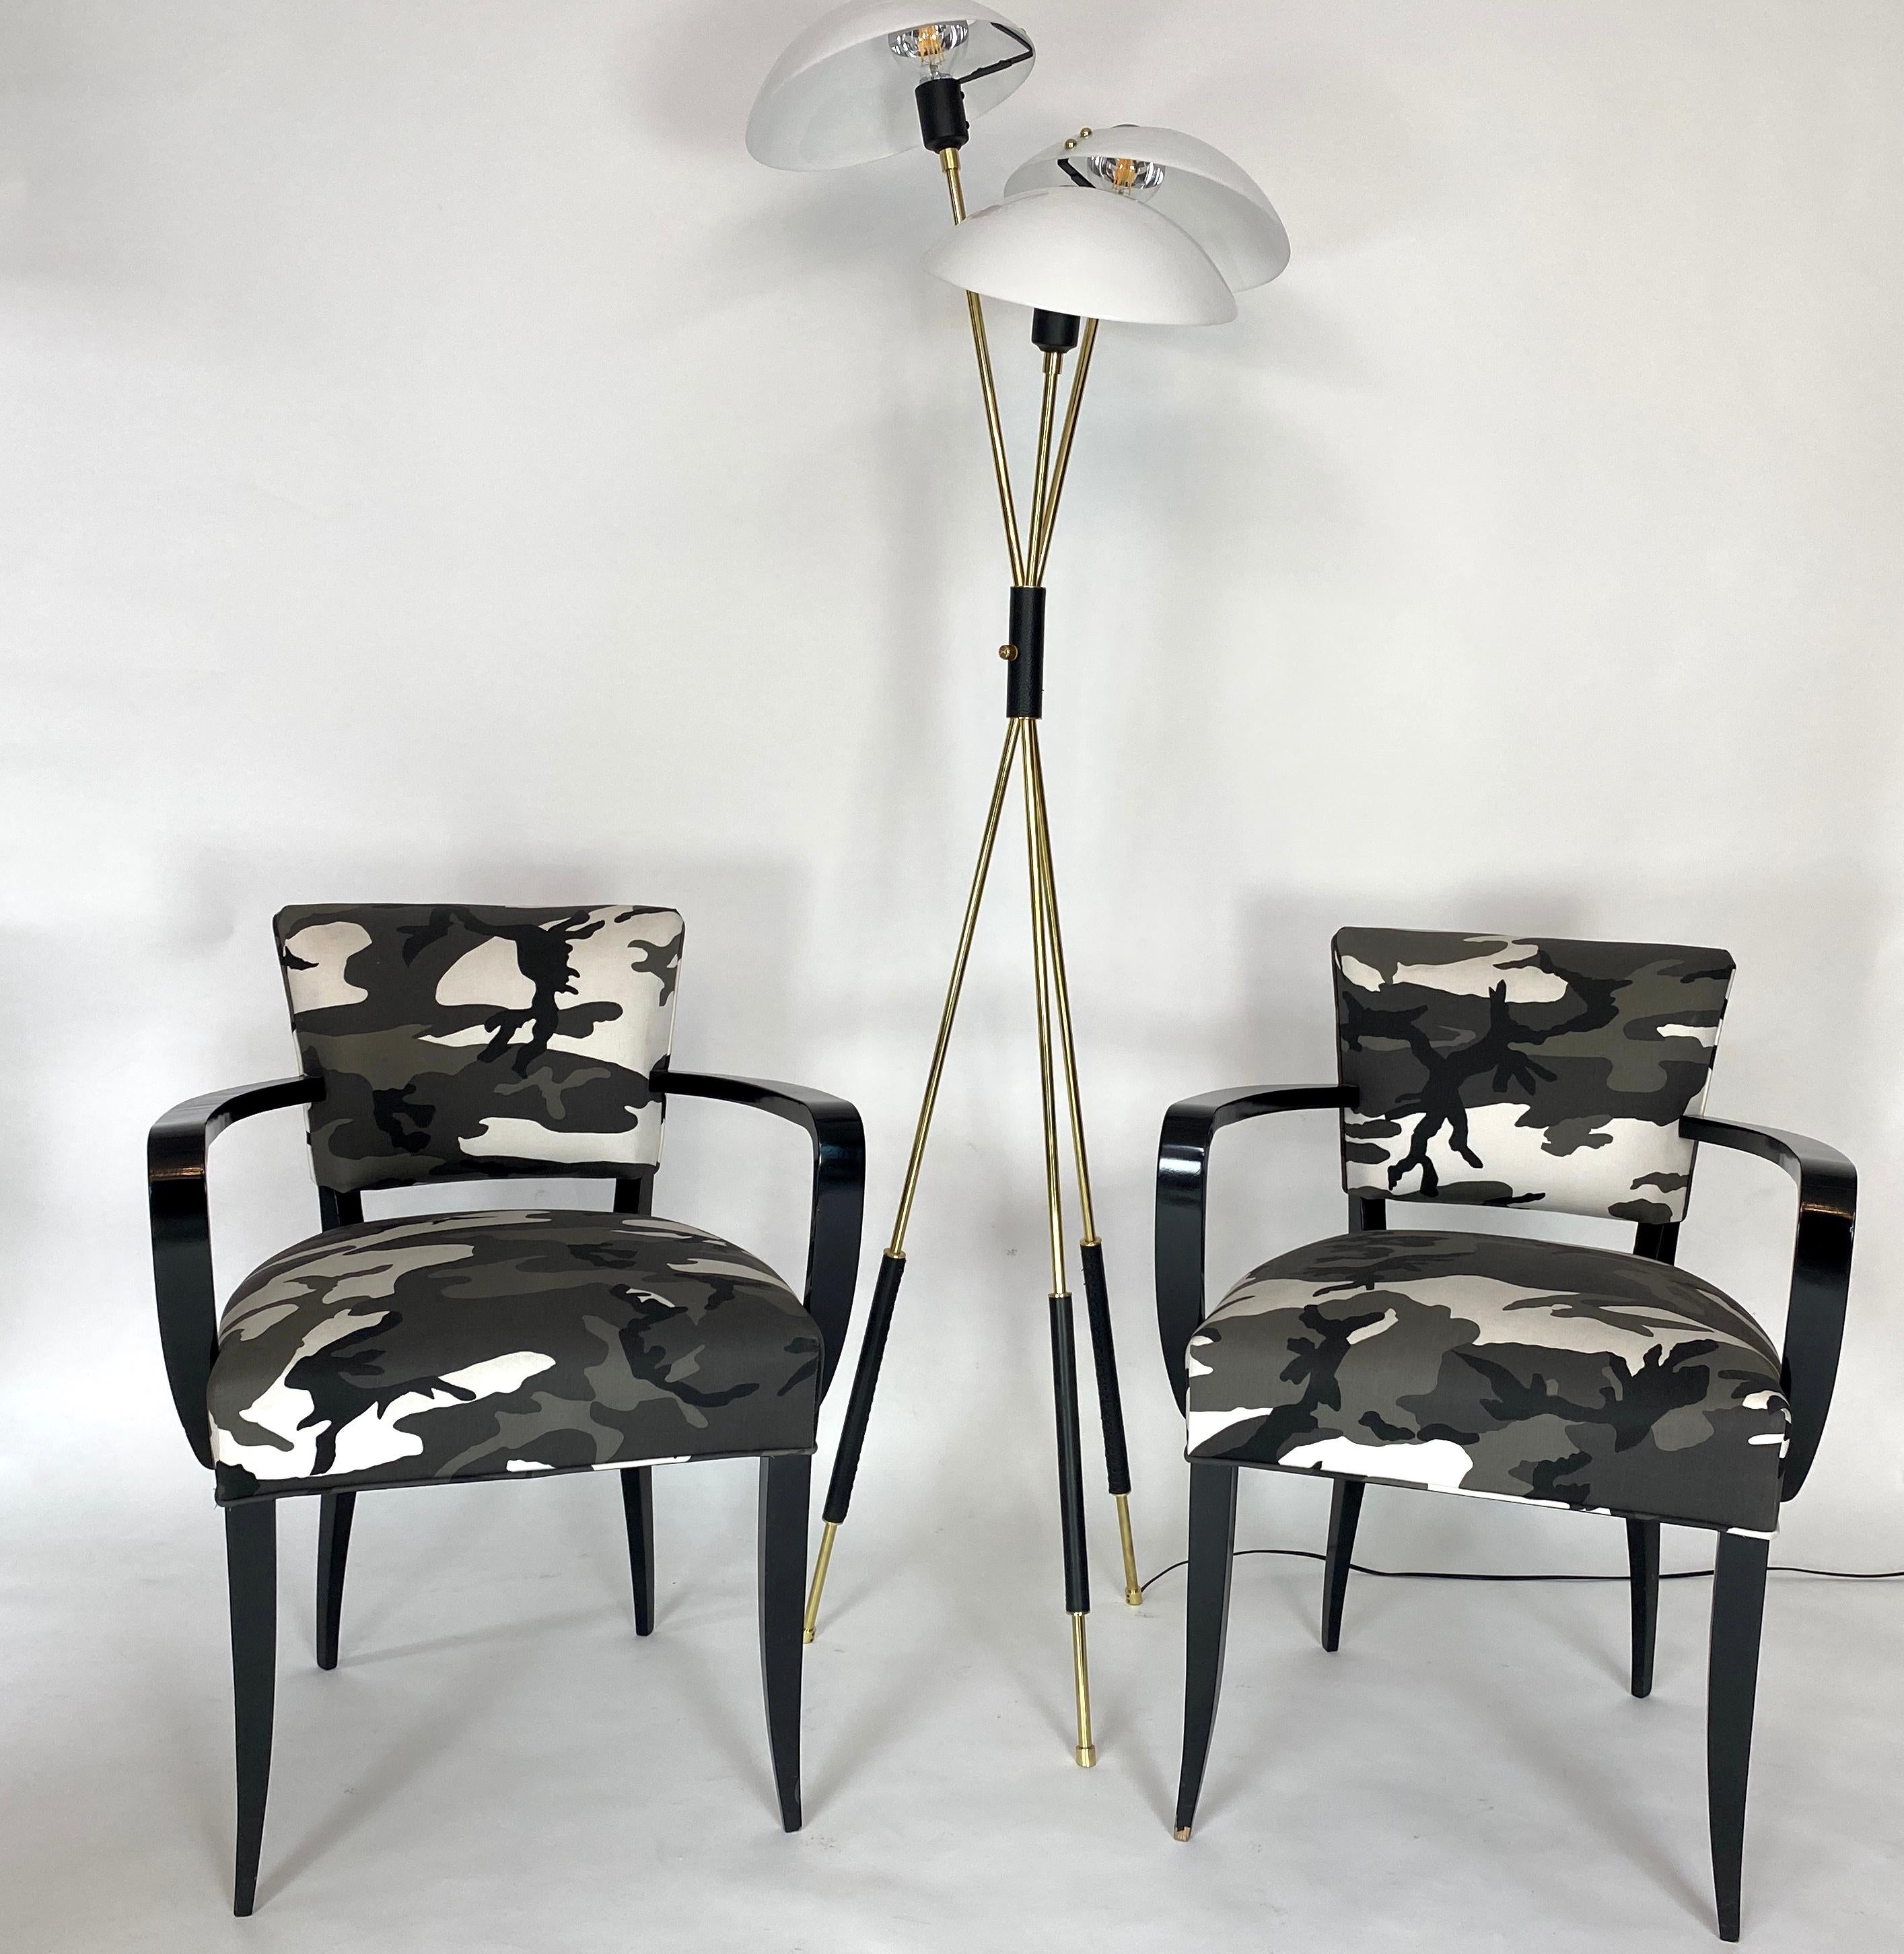 Pair of Bridge Chairs, Urban Camo In Good Condition For Sale In Los Angeles, CA